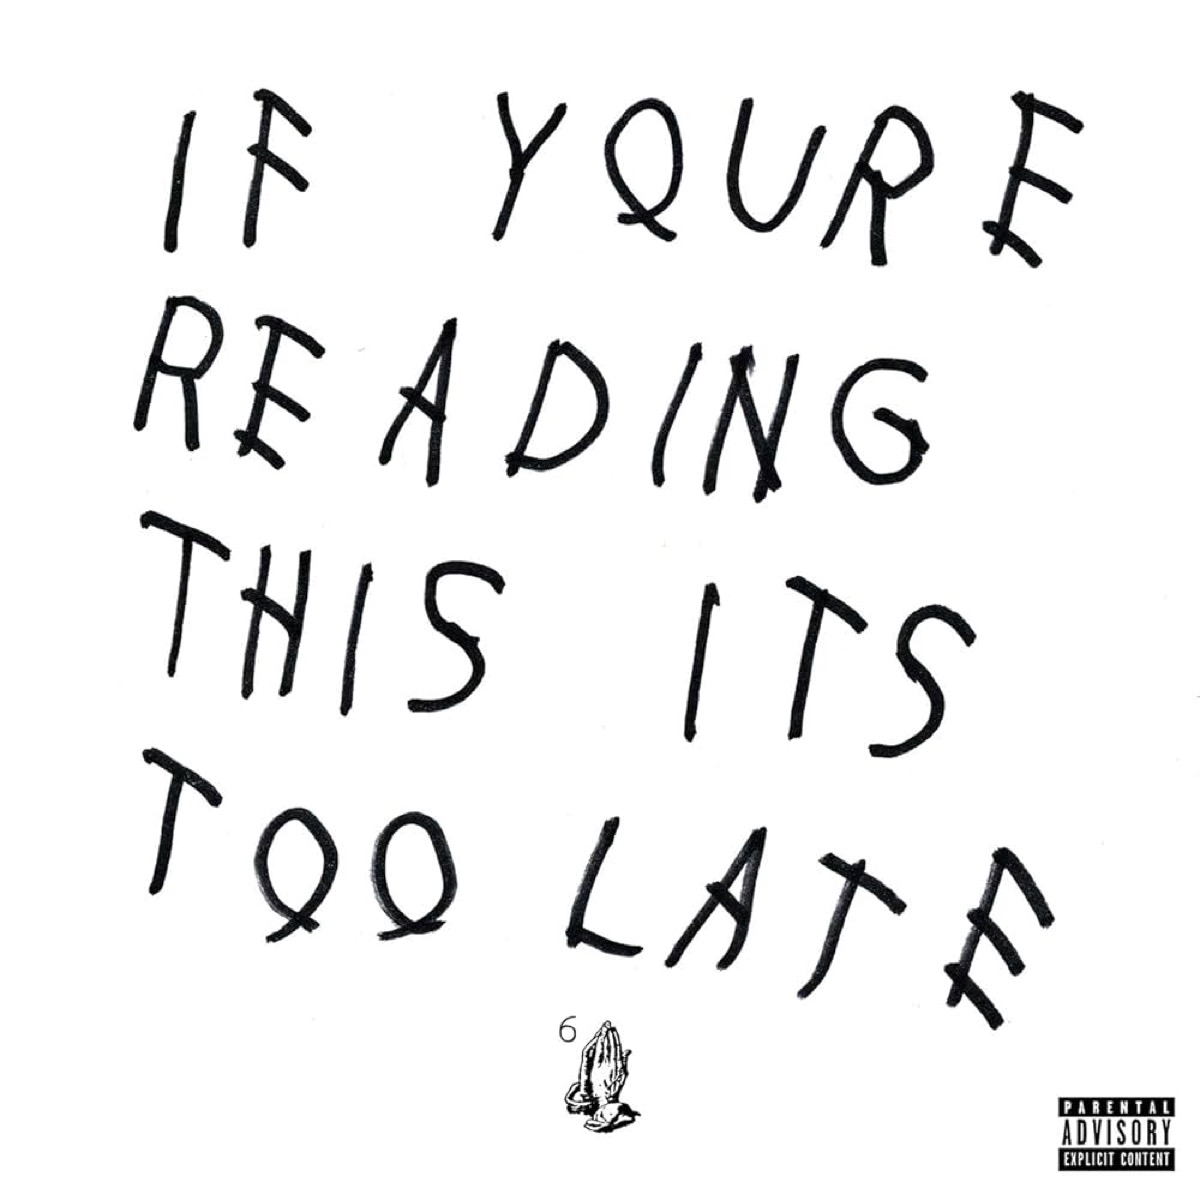 "If You're Reading This It's Too Late" by Drake album cover